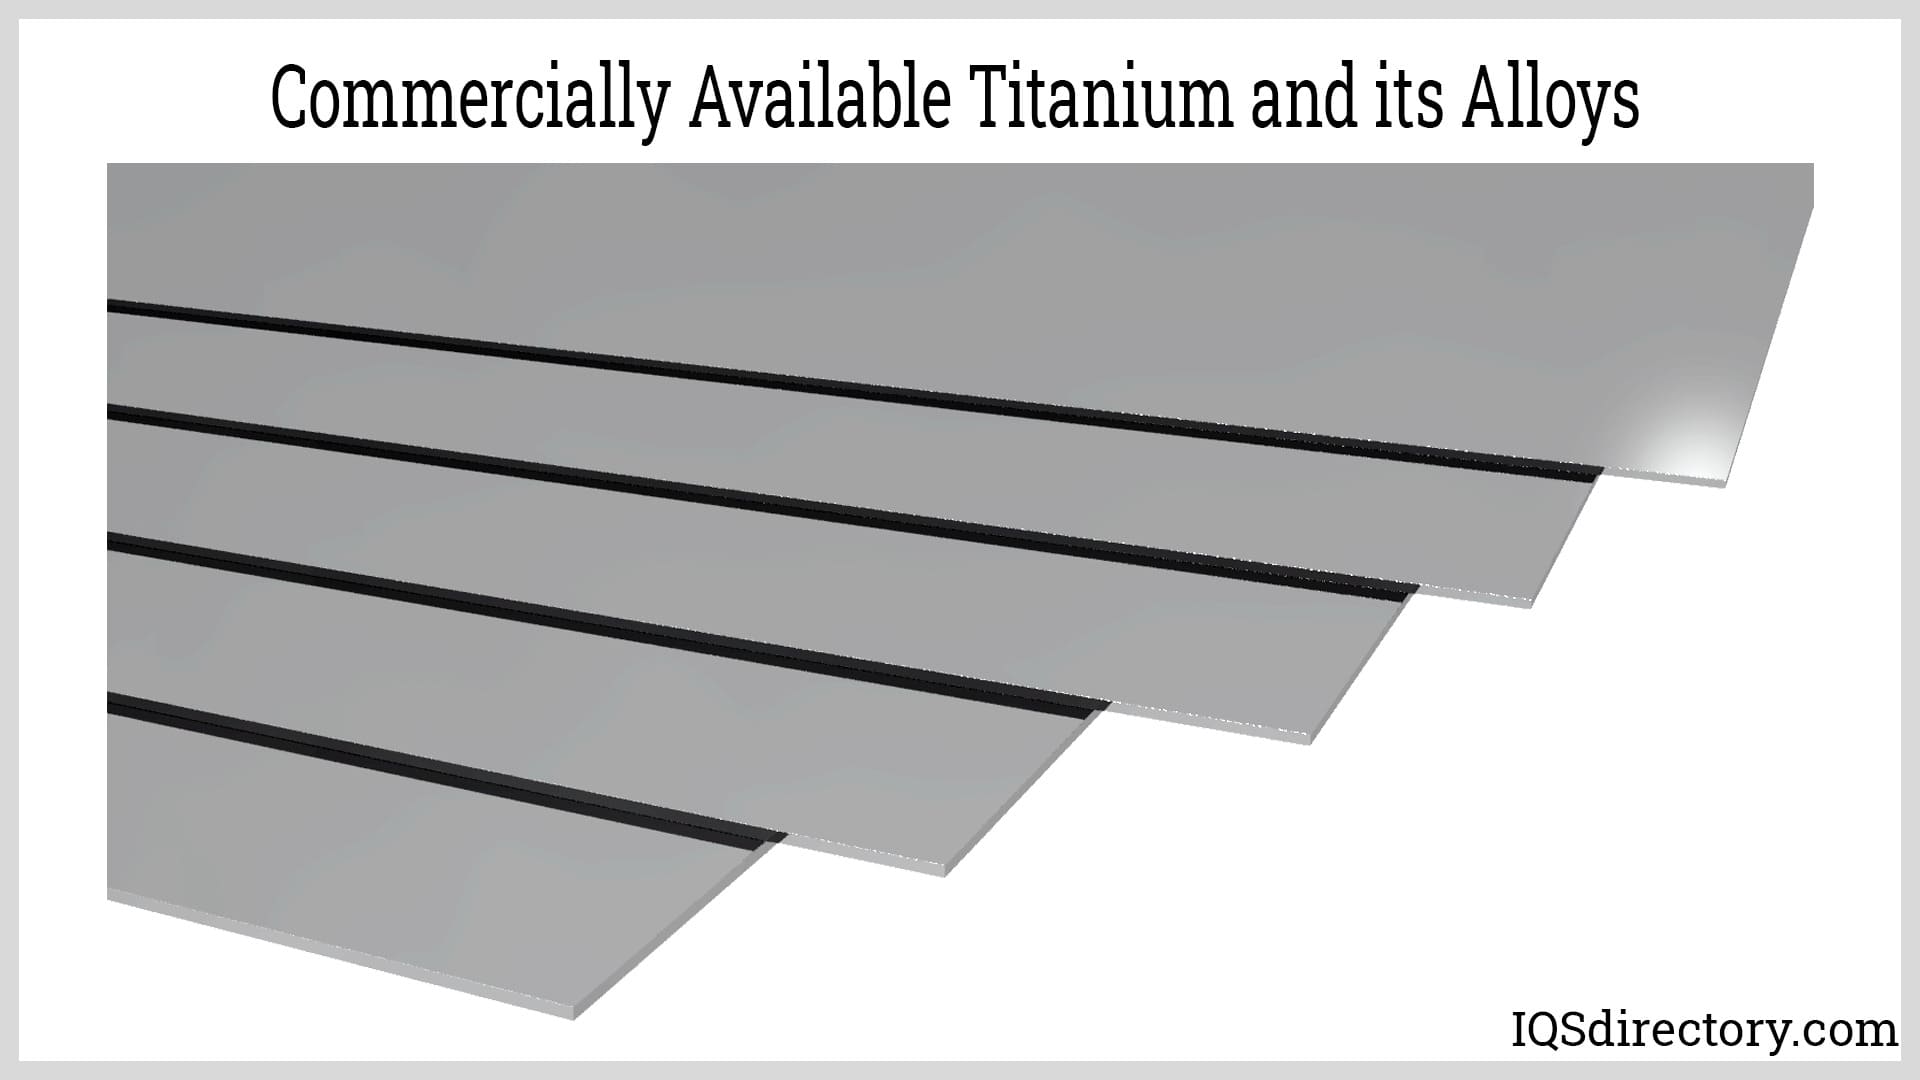 Commercially available titanium and its alloys